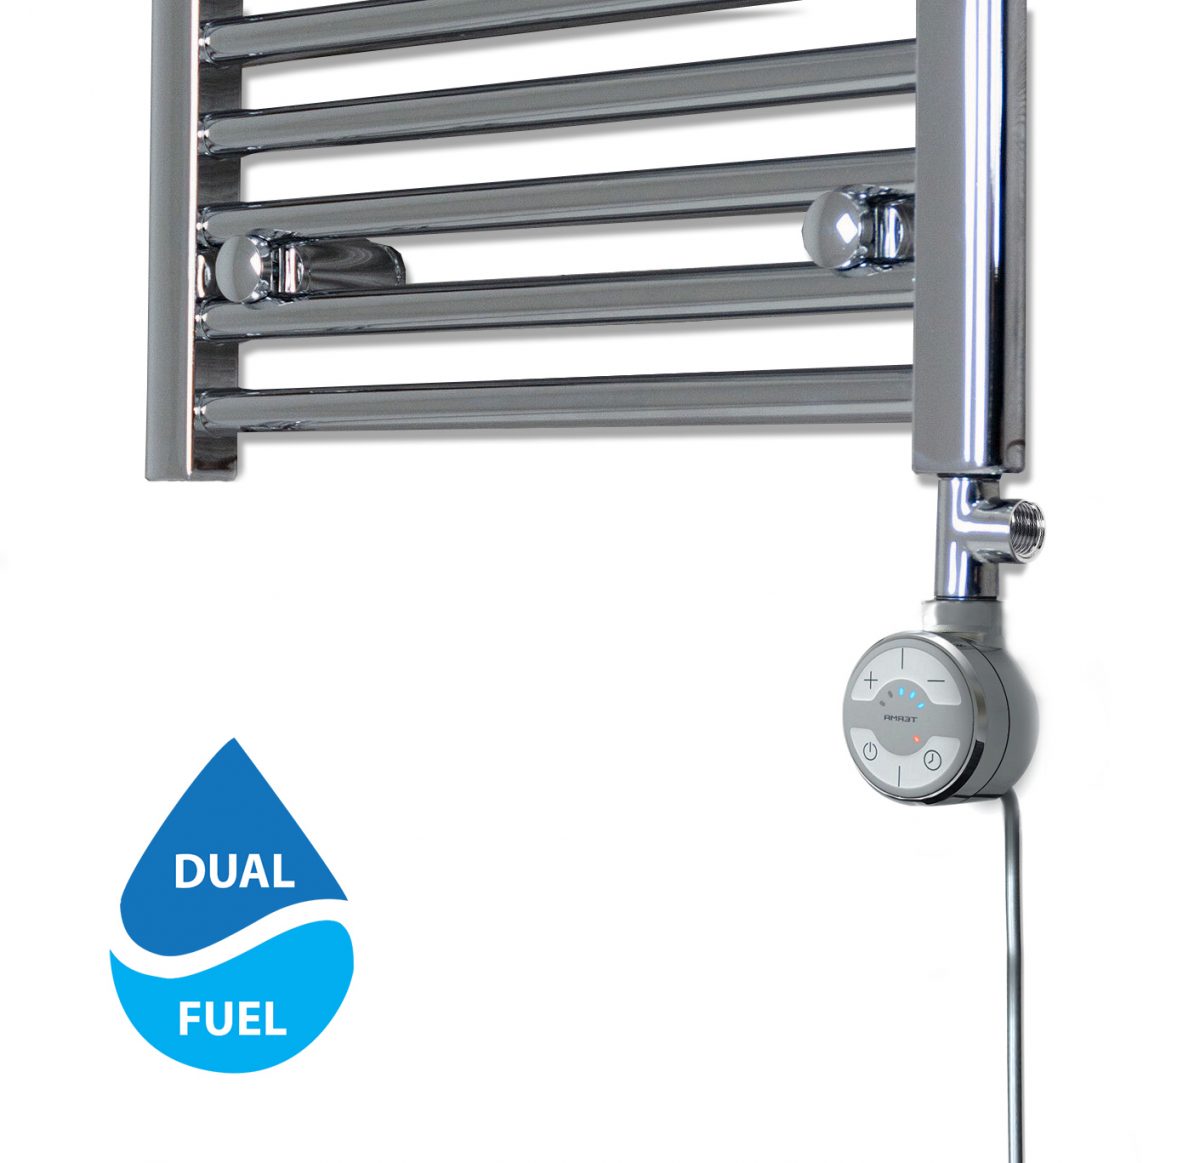 Terma MOA Electrical Towel Rail Radiator Heating Element With T-Pieces